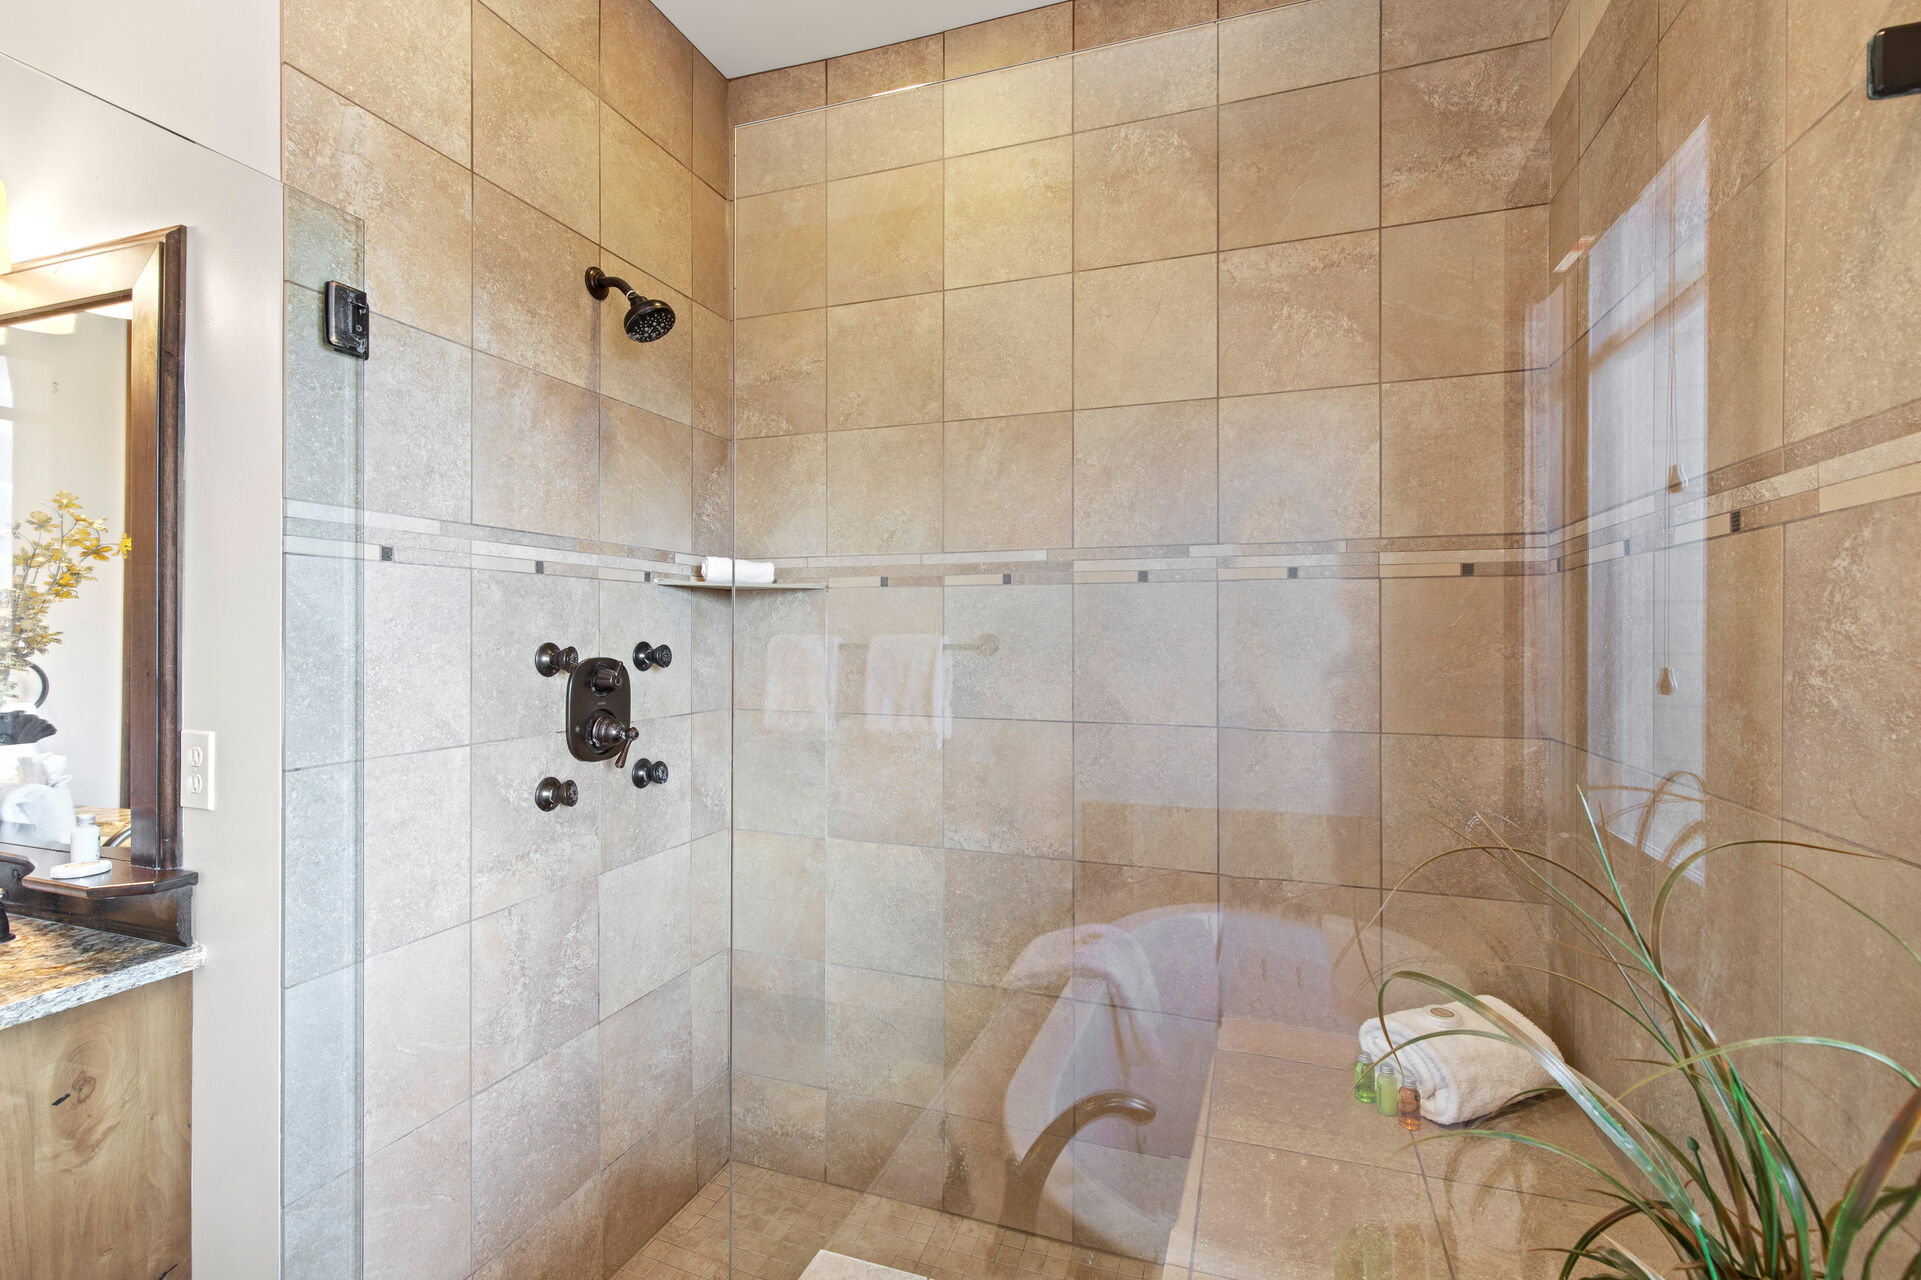 Master Bathroom with double sinks, jetted tub, and large tile and glass shower